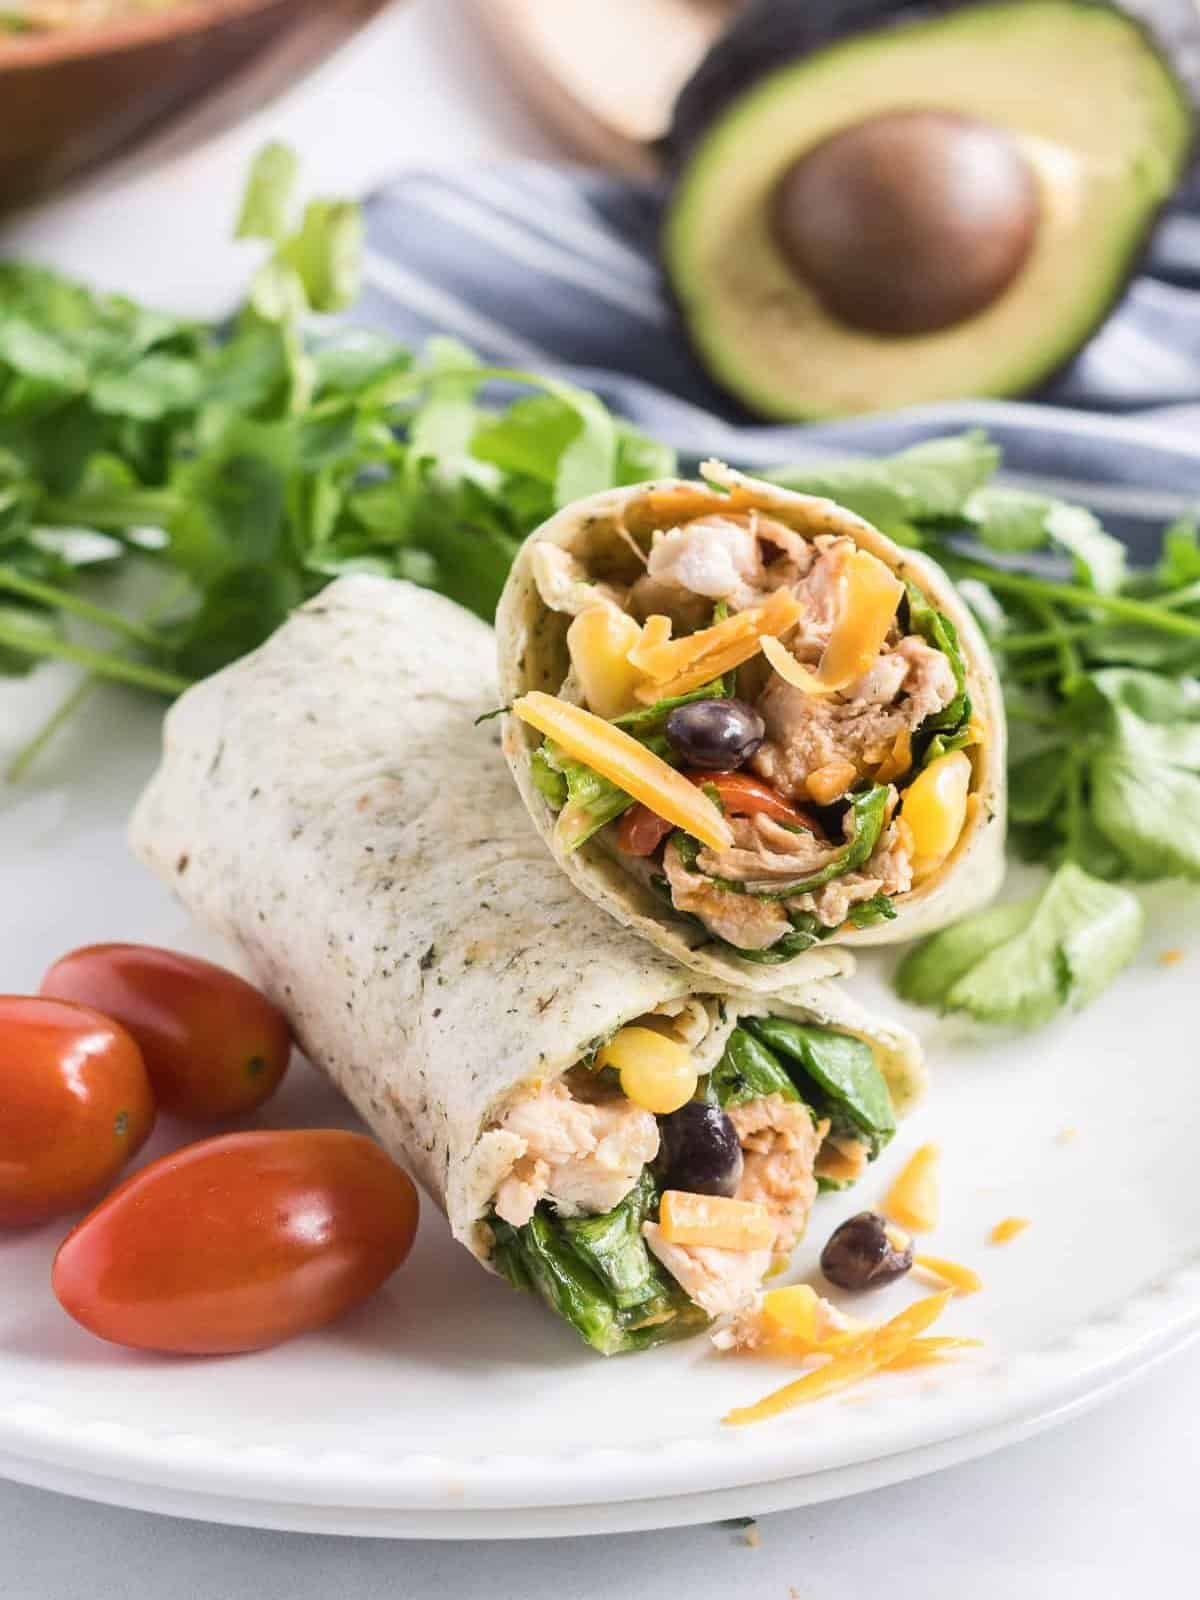 BBQ chicken salad wrap on a plate with lettuce and tomatoes.